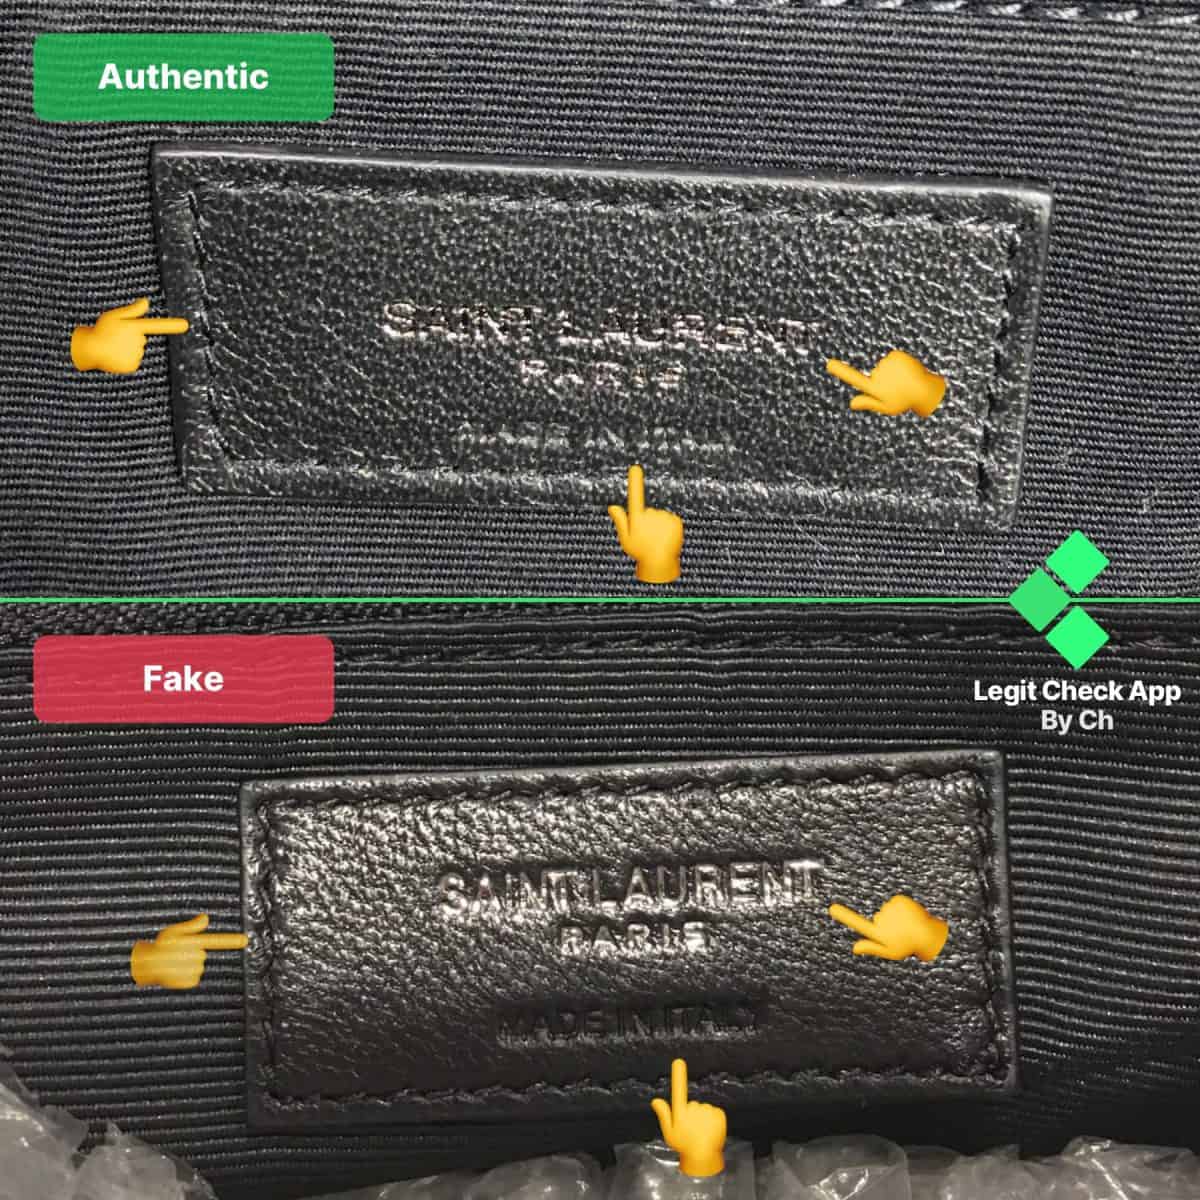 how to tell if saint laurent bag is real